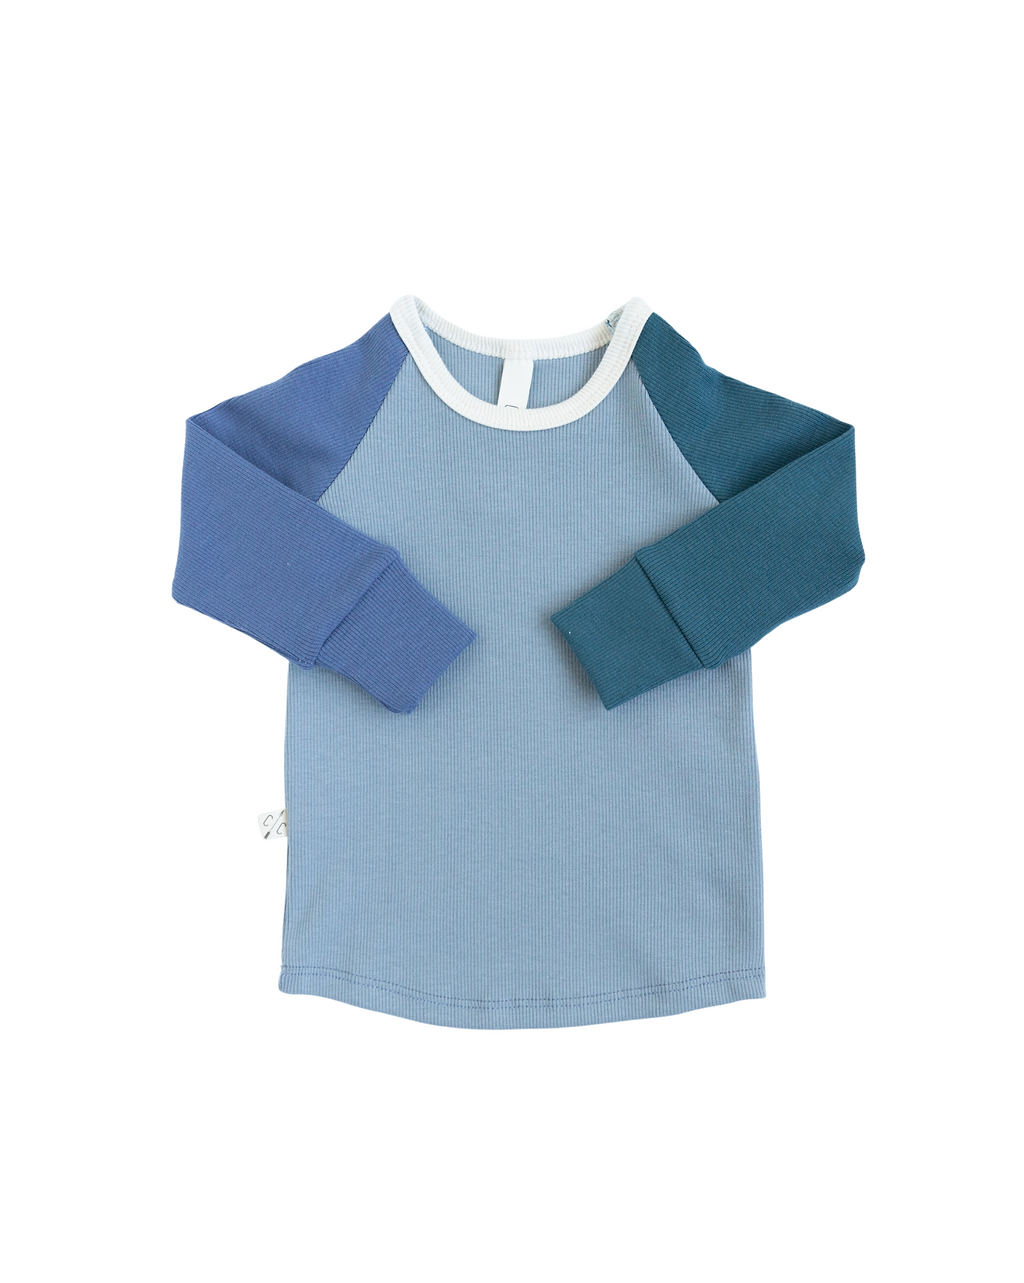 rib knit long sleeve tee - whale ink blue and neptune